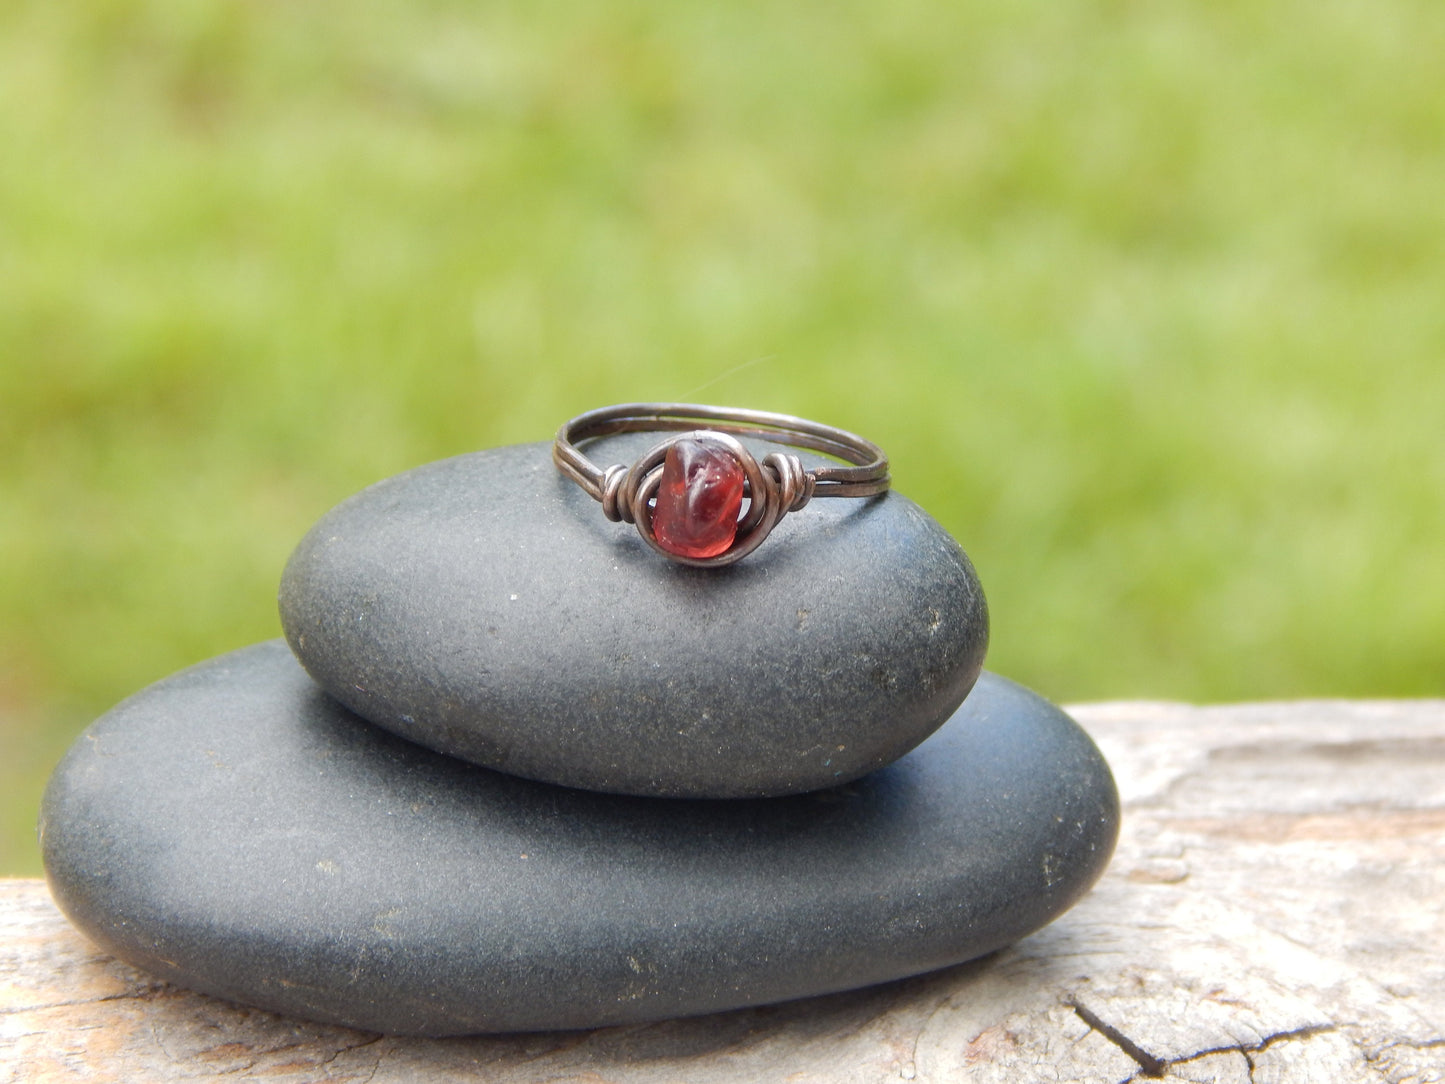 Copper wire wrapped garnet size 7.5 ring